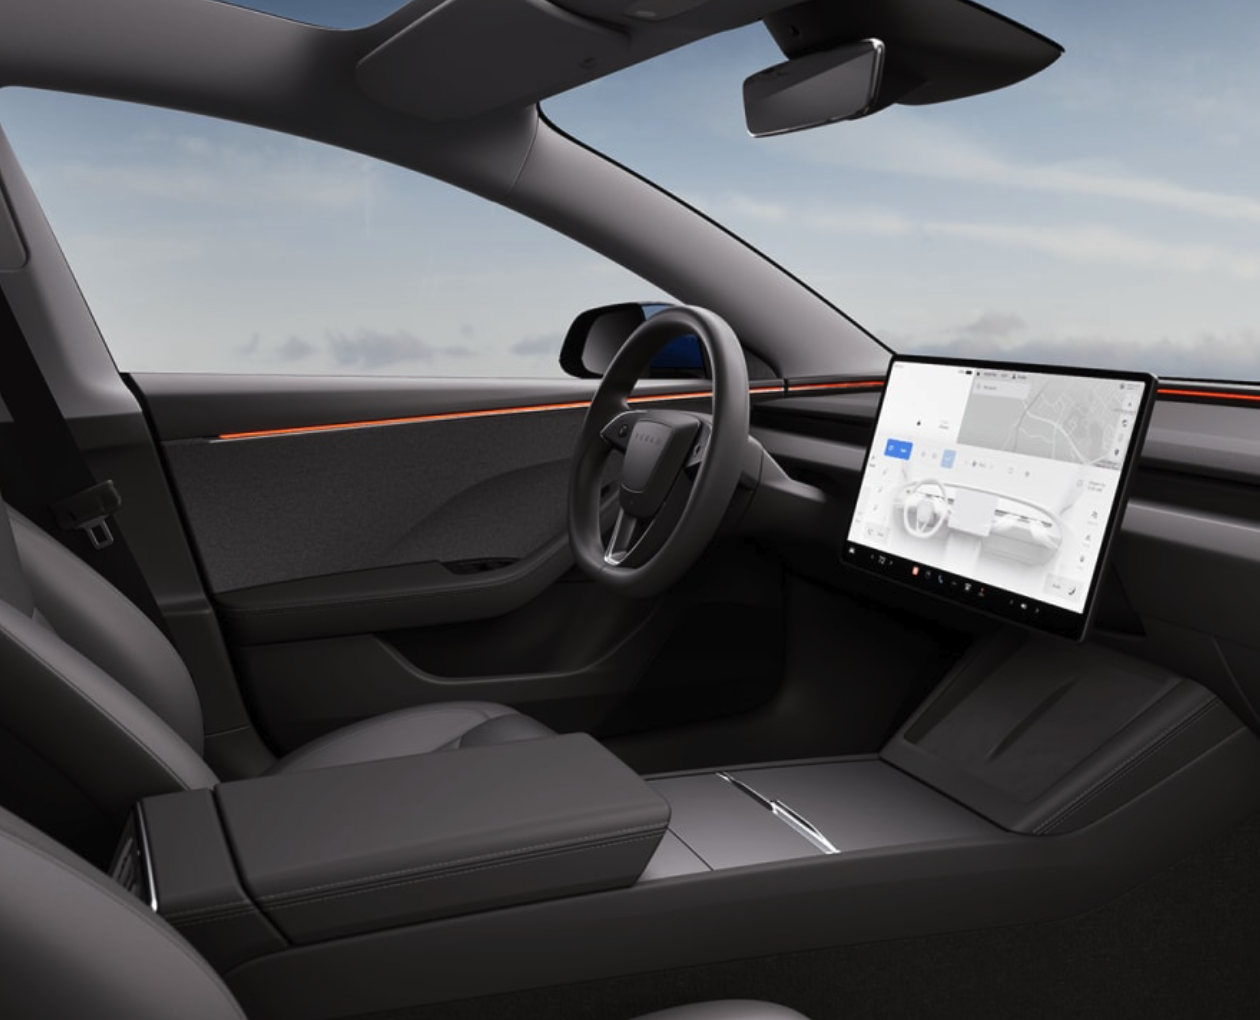 Tesla Model 3 Gets a Welcome Refresh with New, Desirable Features